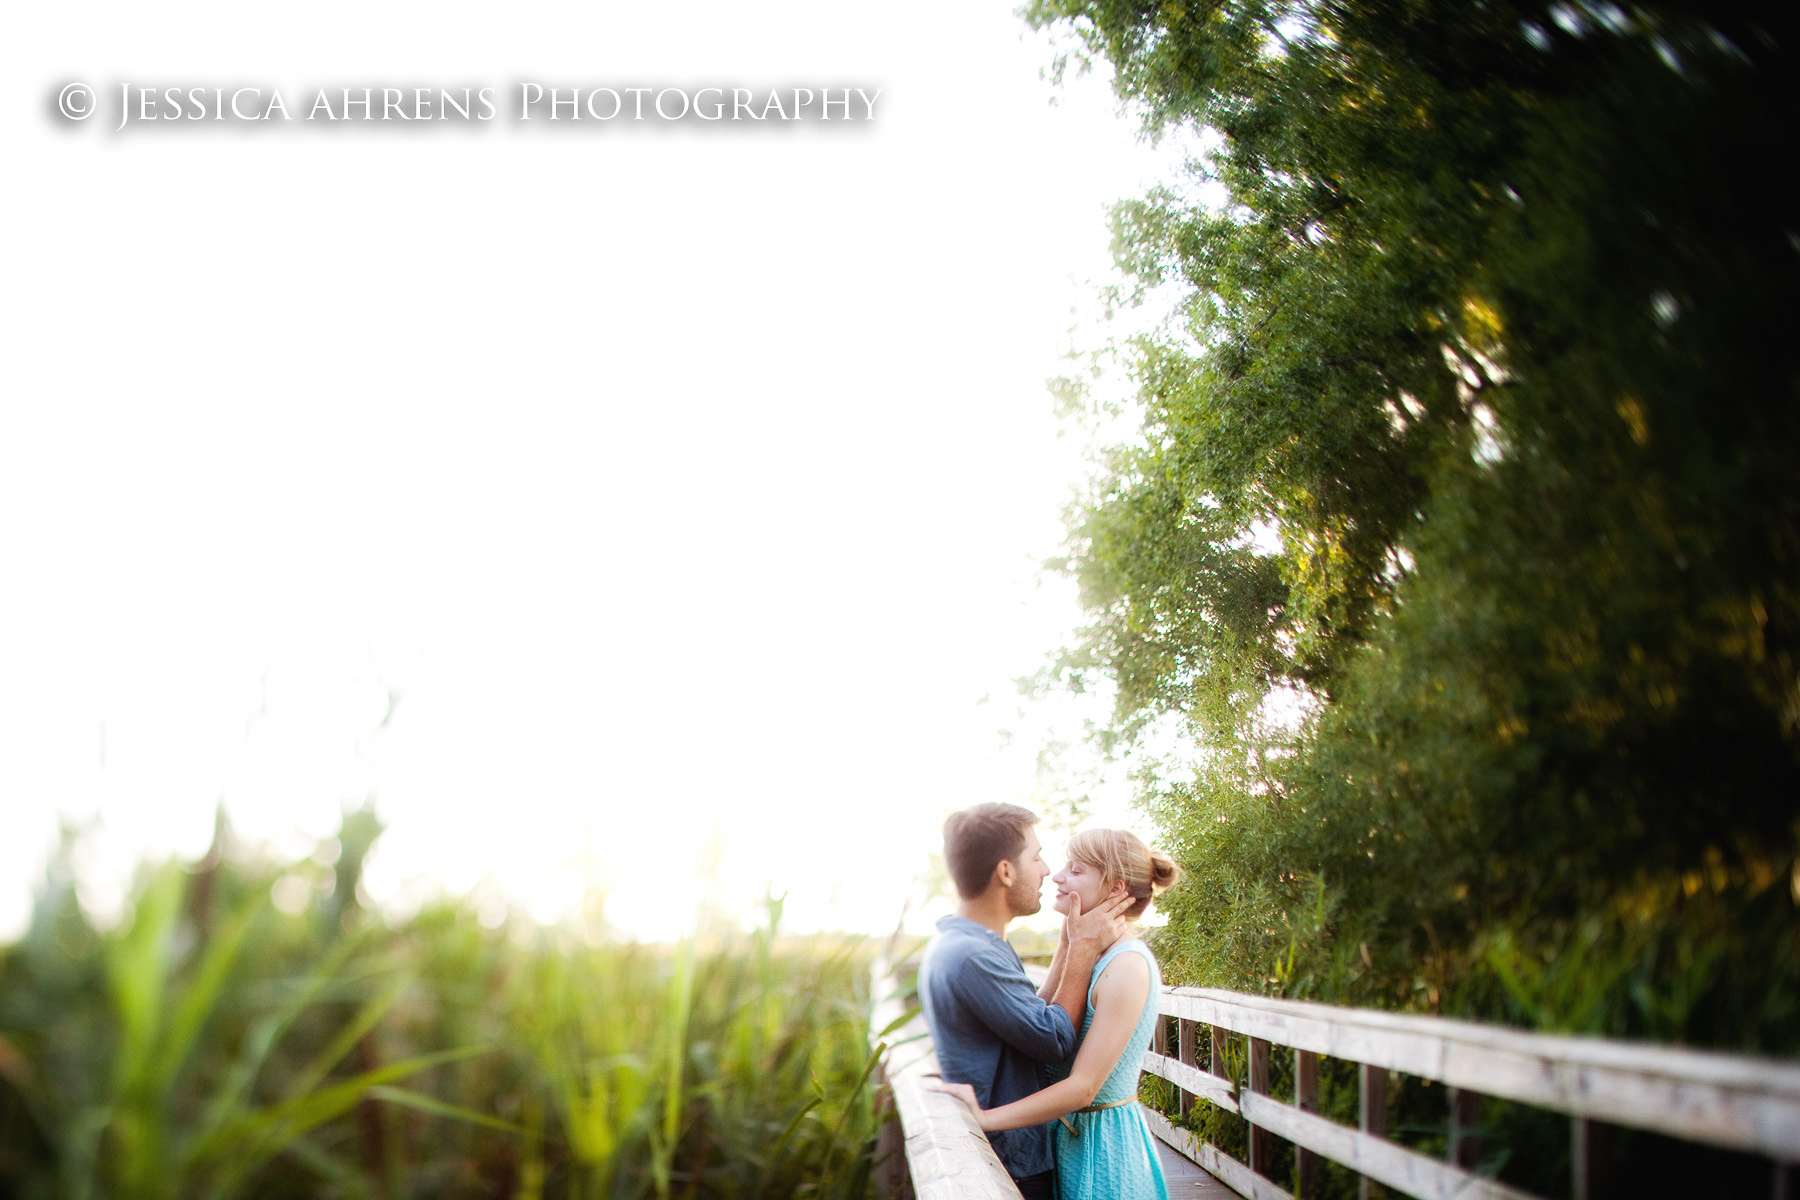 Times new beach buffalo ny outer harbor wedding and portrait photography _54